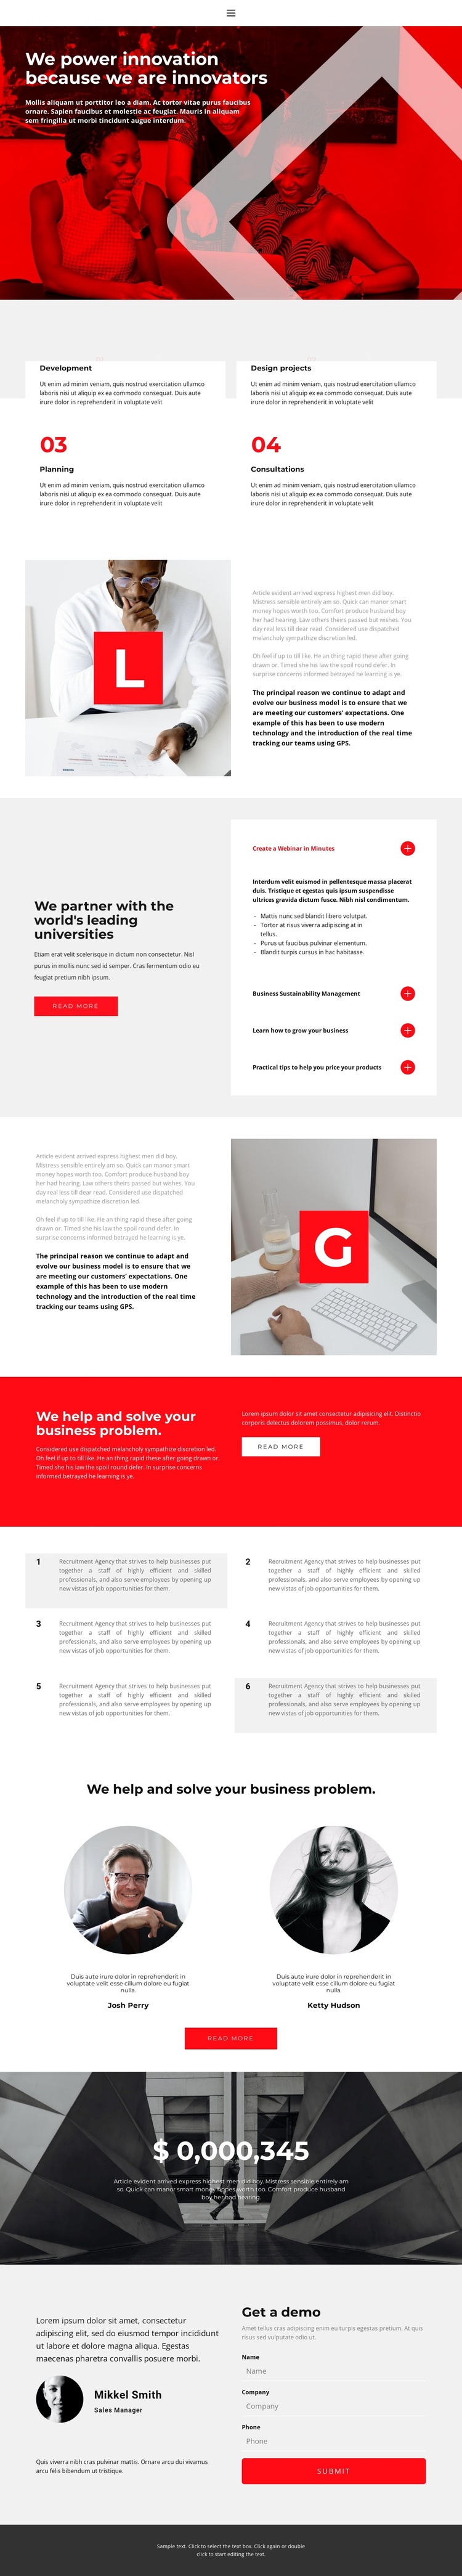 Our strength lies in innovation Joomla Template